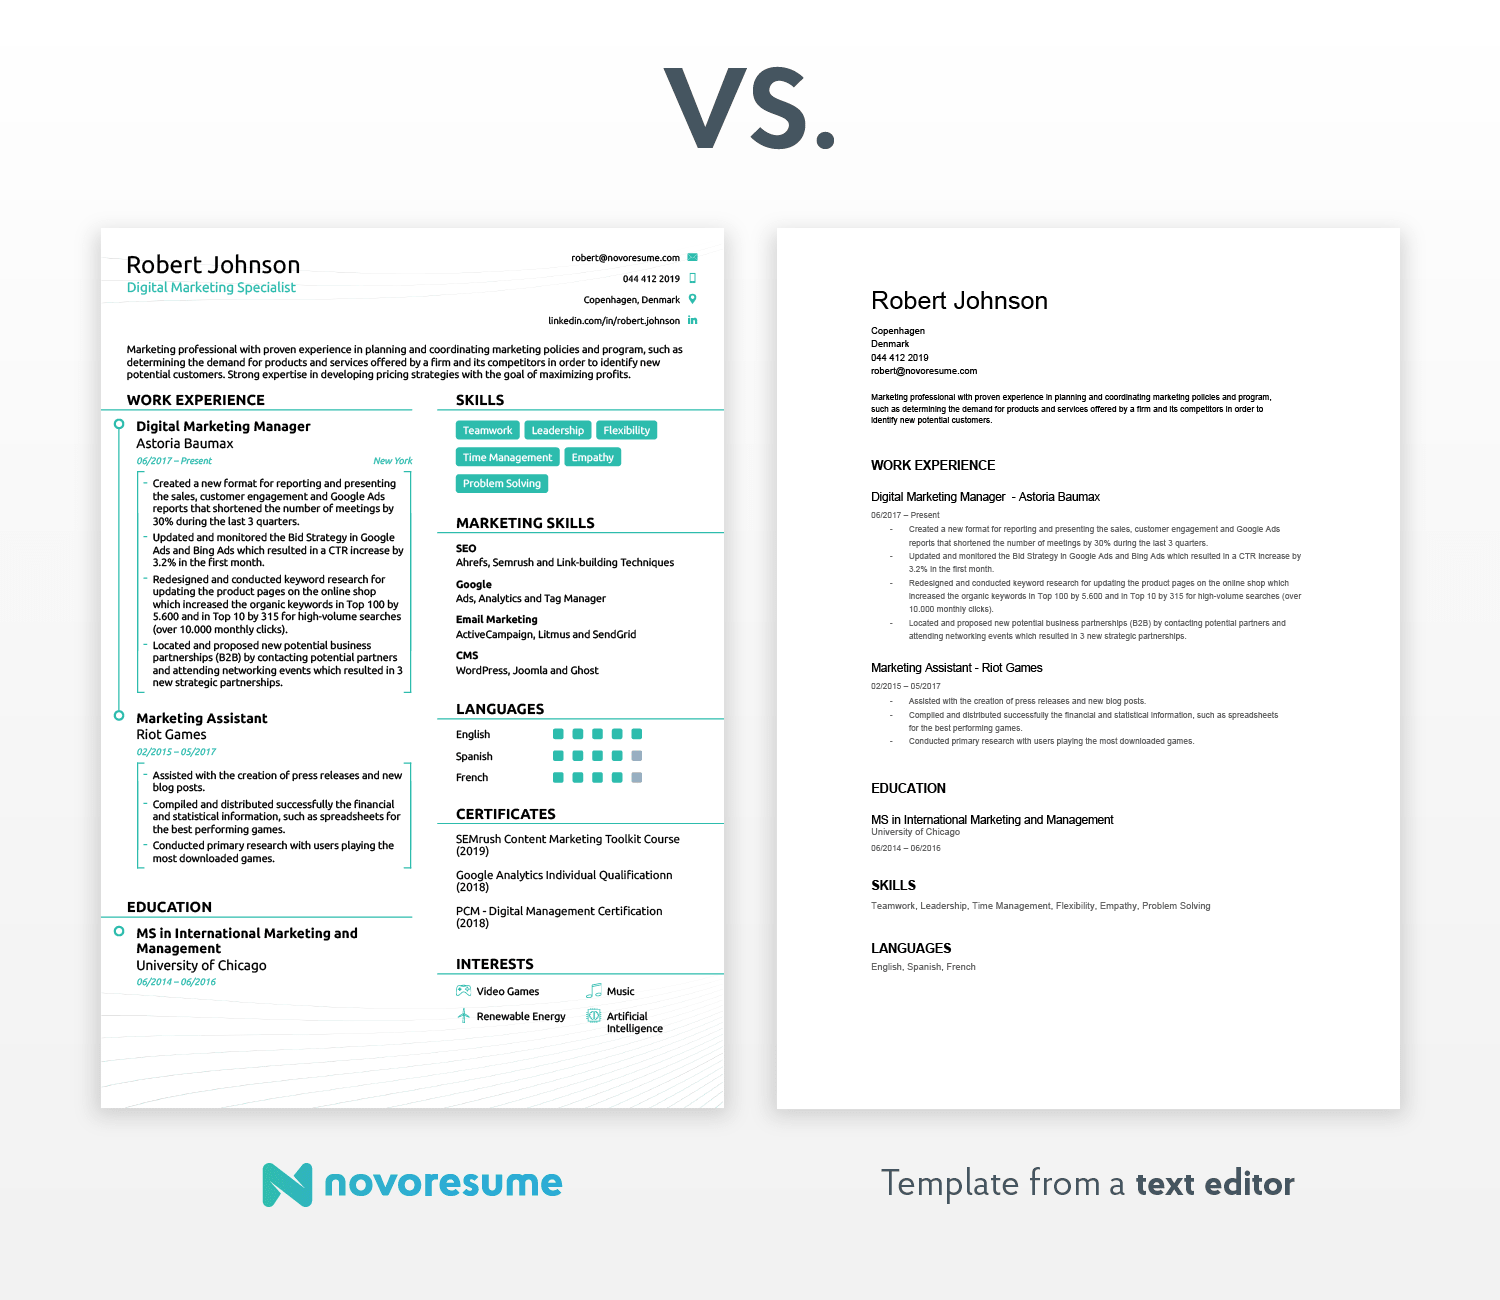 How To Write A Resume For A Job Modern Template how to write a resume for a job|wikiresume.com